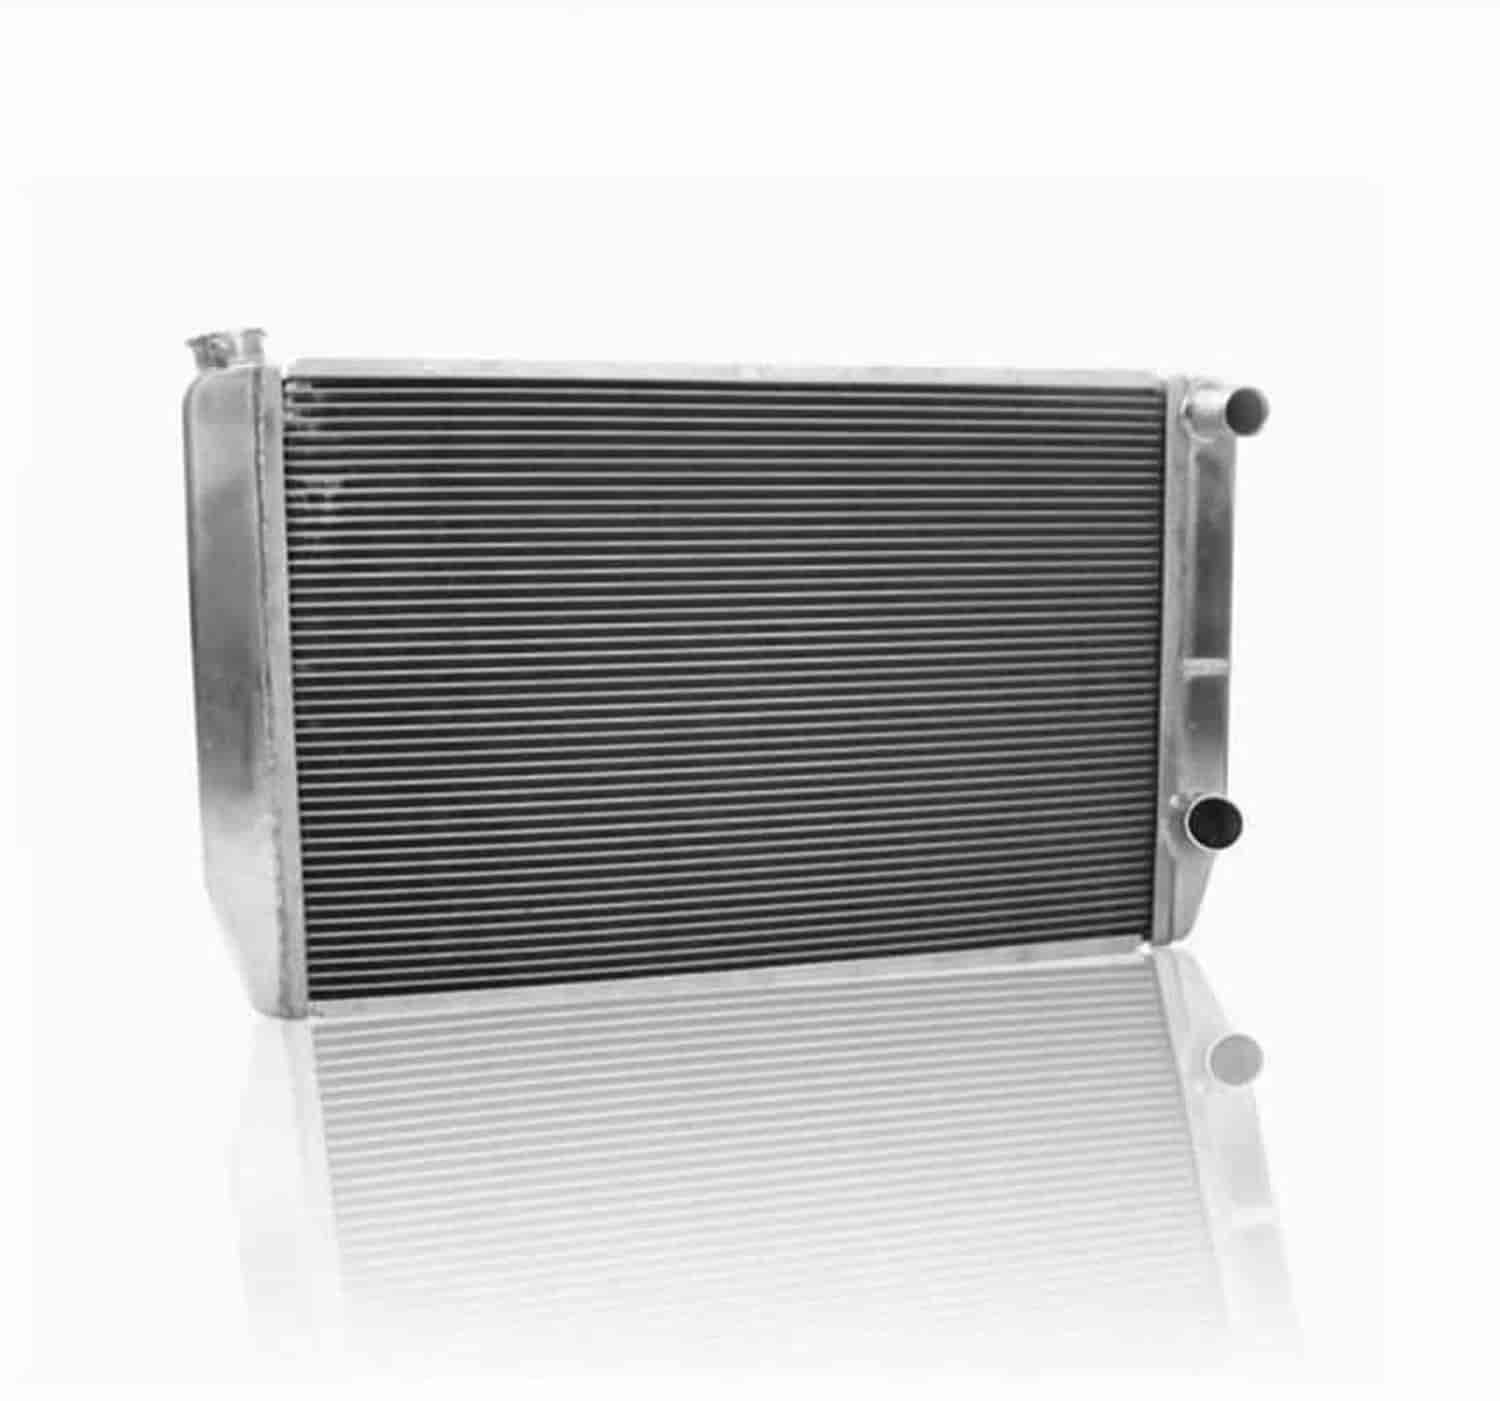 ClassicCool Universal Fit Radiator Dual Pass Crossflow Design 27.50" x 15.50" with Straight Outlet